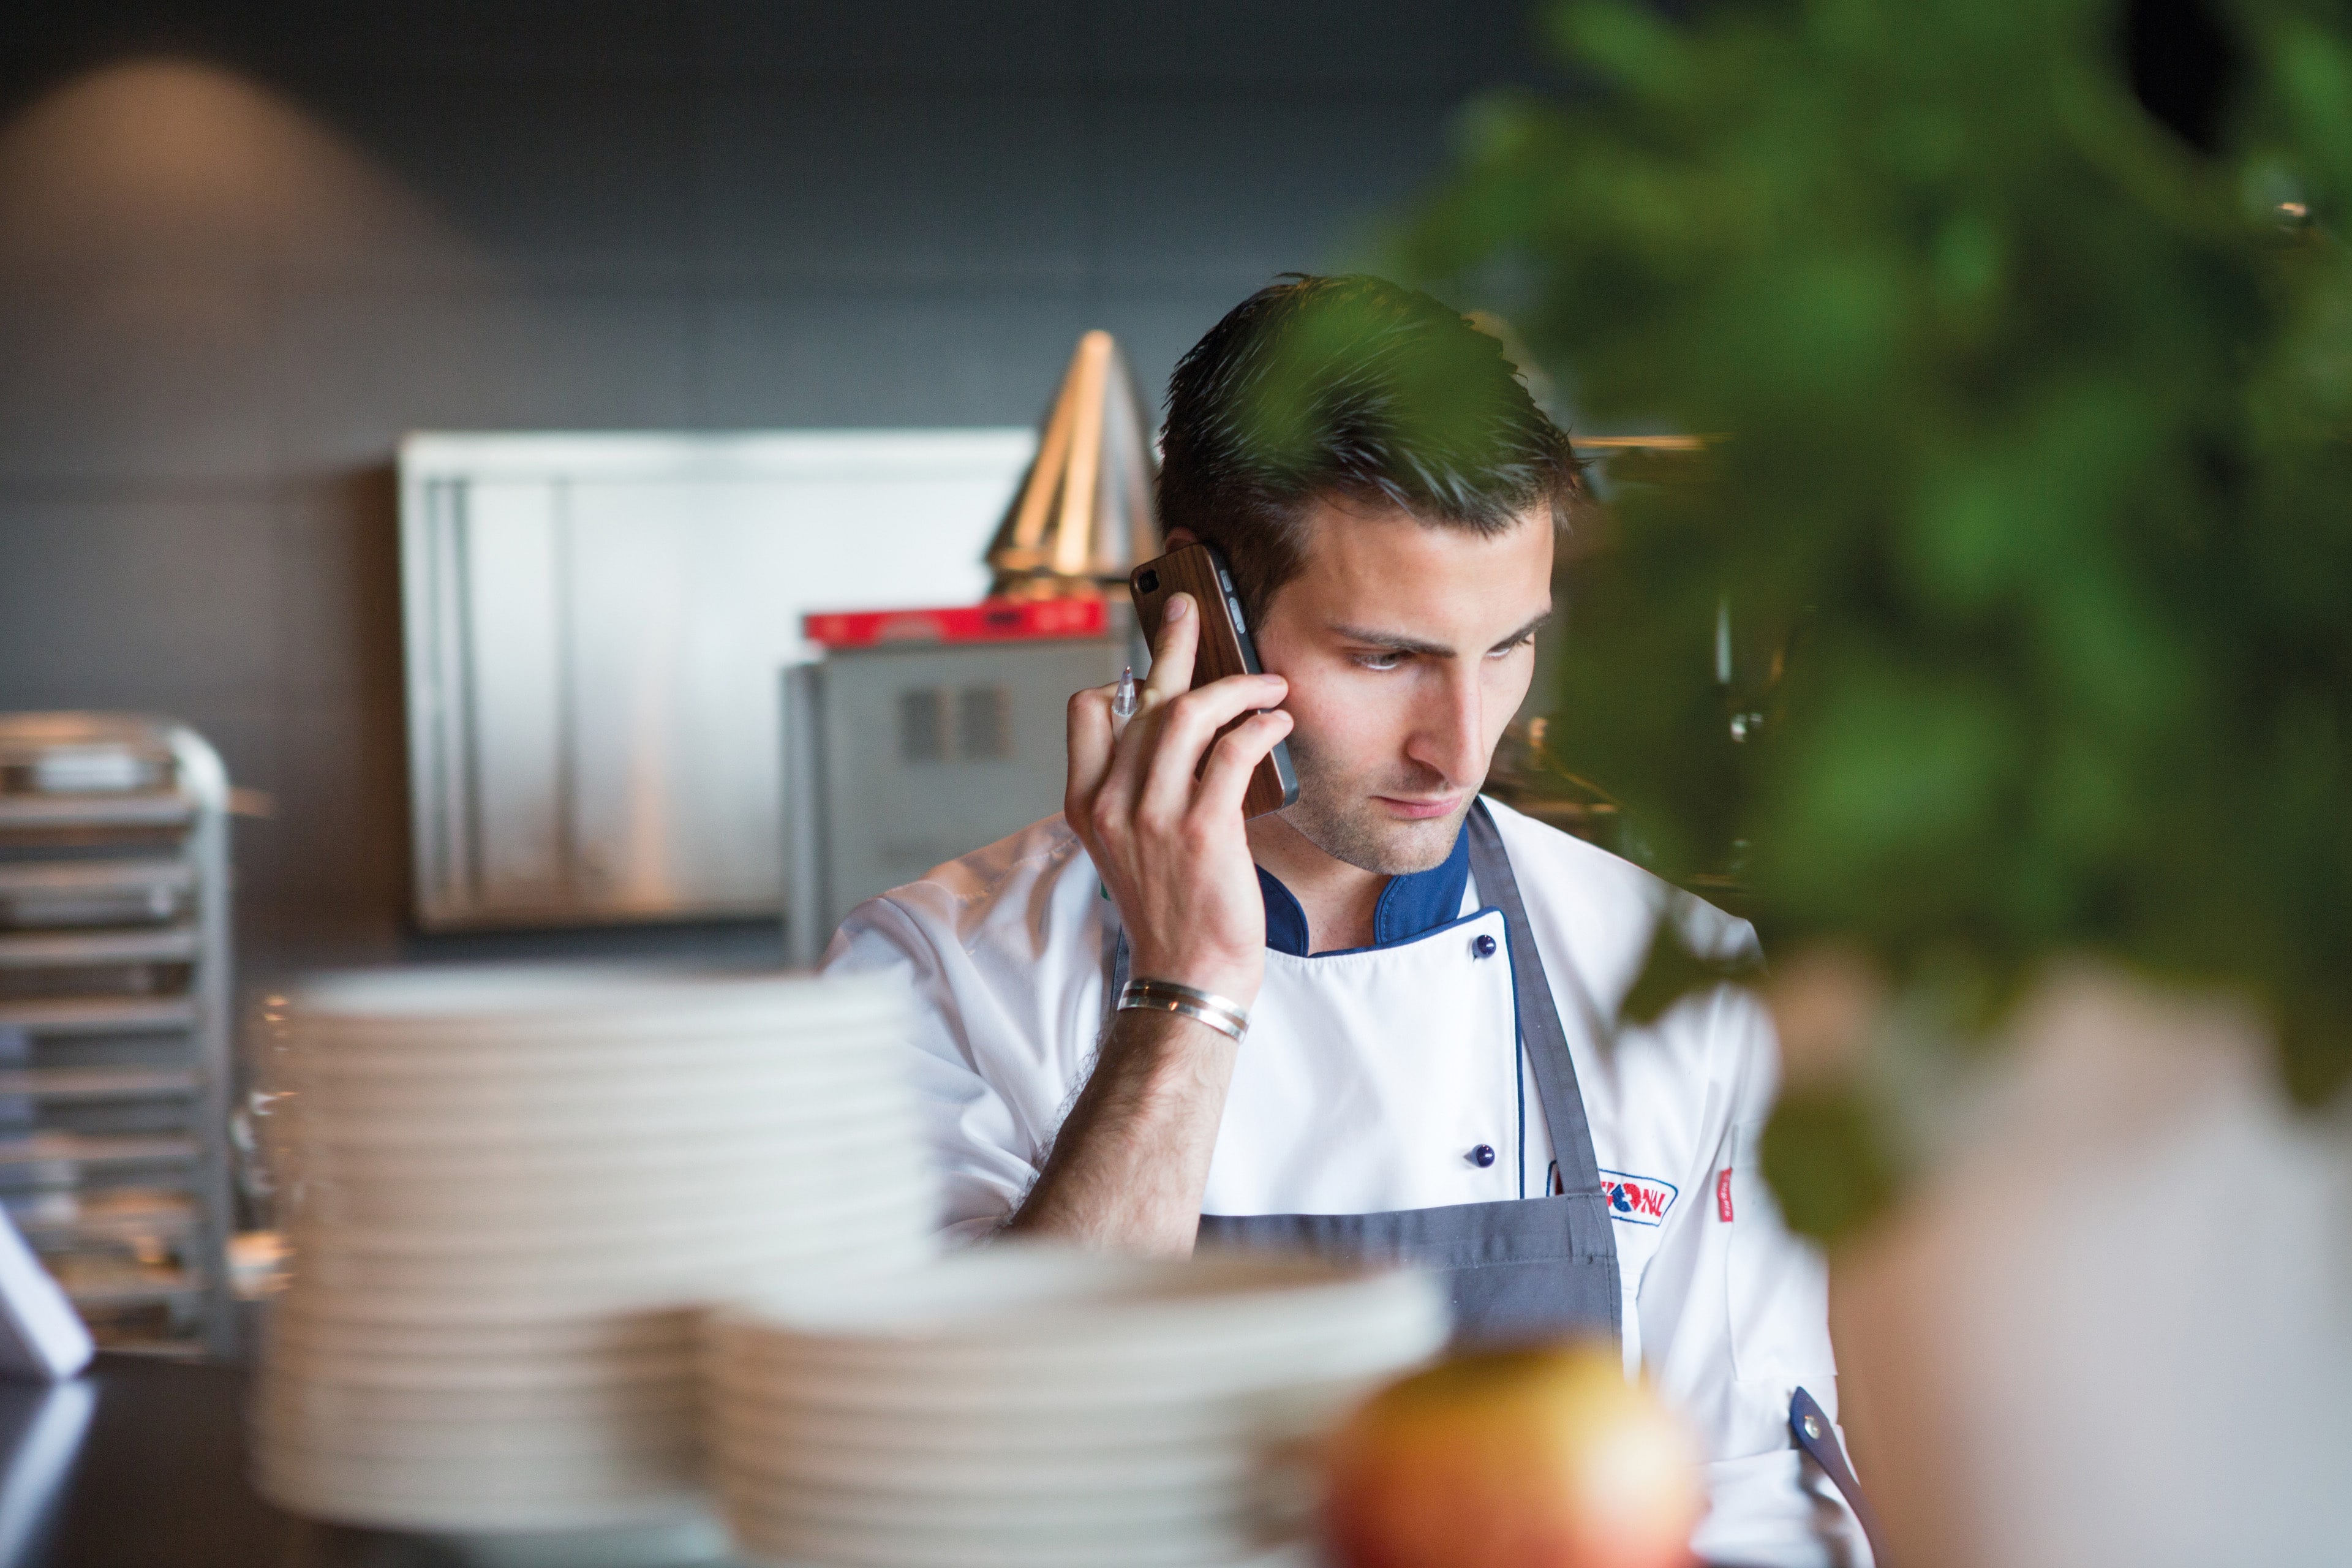 Rational offers support for chefs